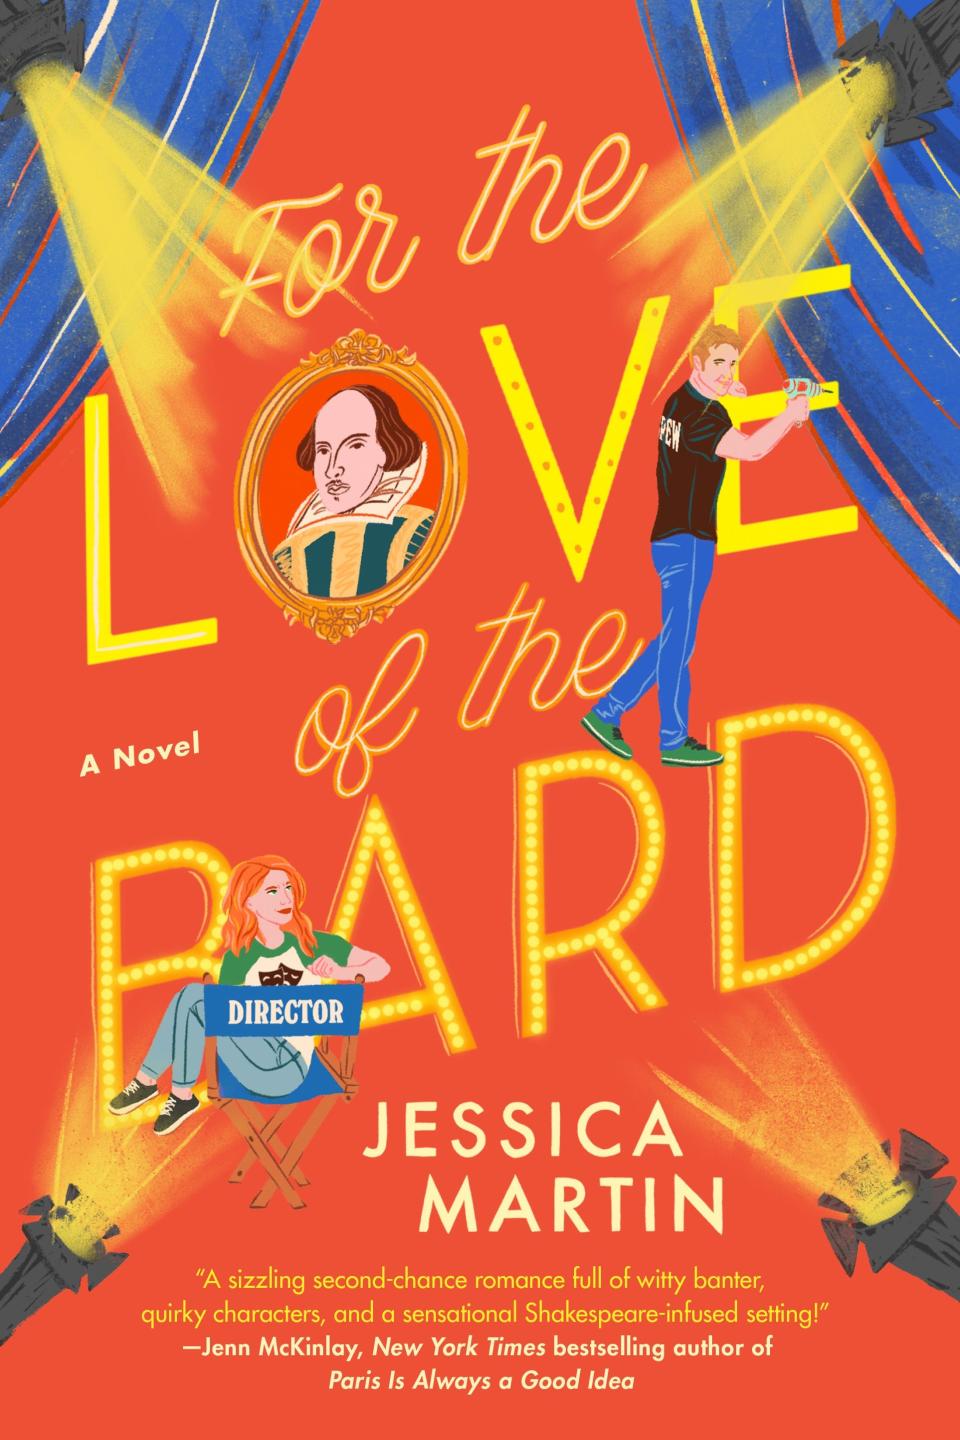 "For the Love of the Bard," by Jessica Martin